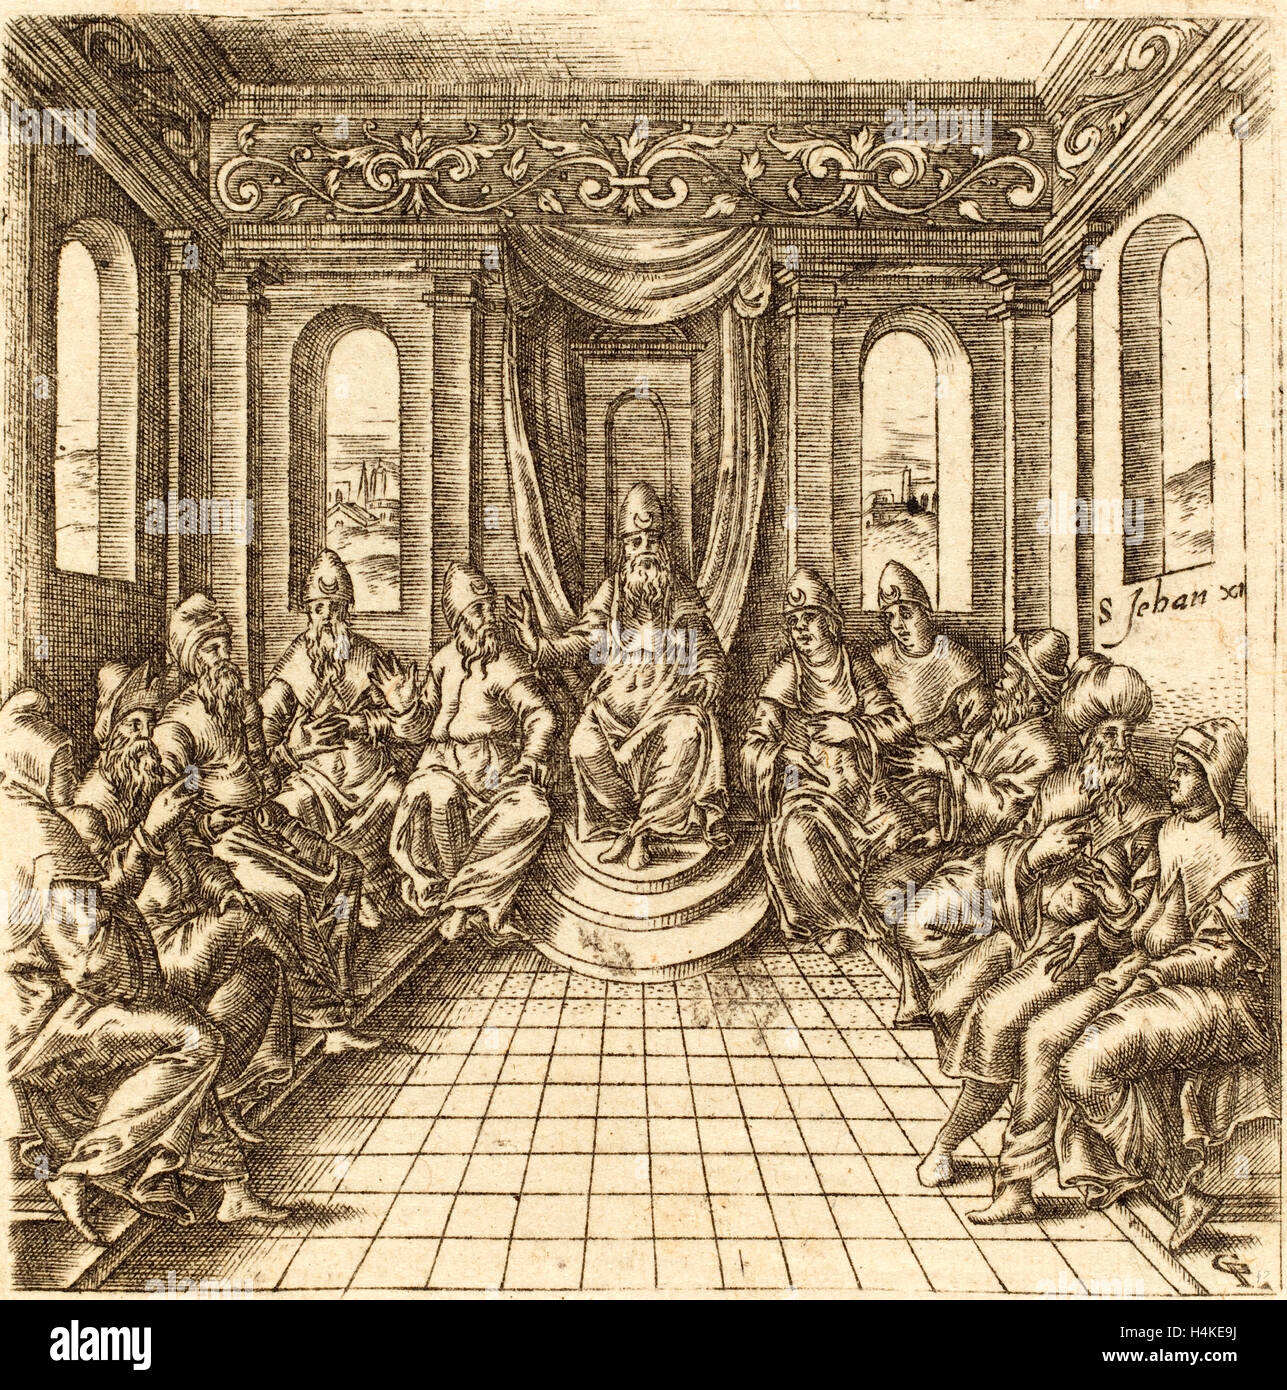 Léonard Gaultier, French (1561-1641), The Chief Priests and Pharisees, probably c. 1576-1580, engraving Stock Photo